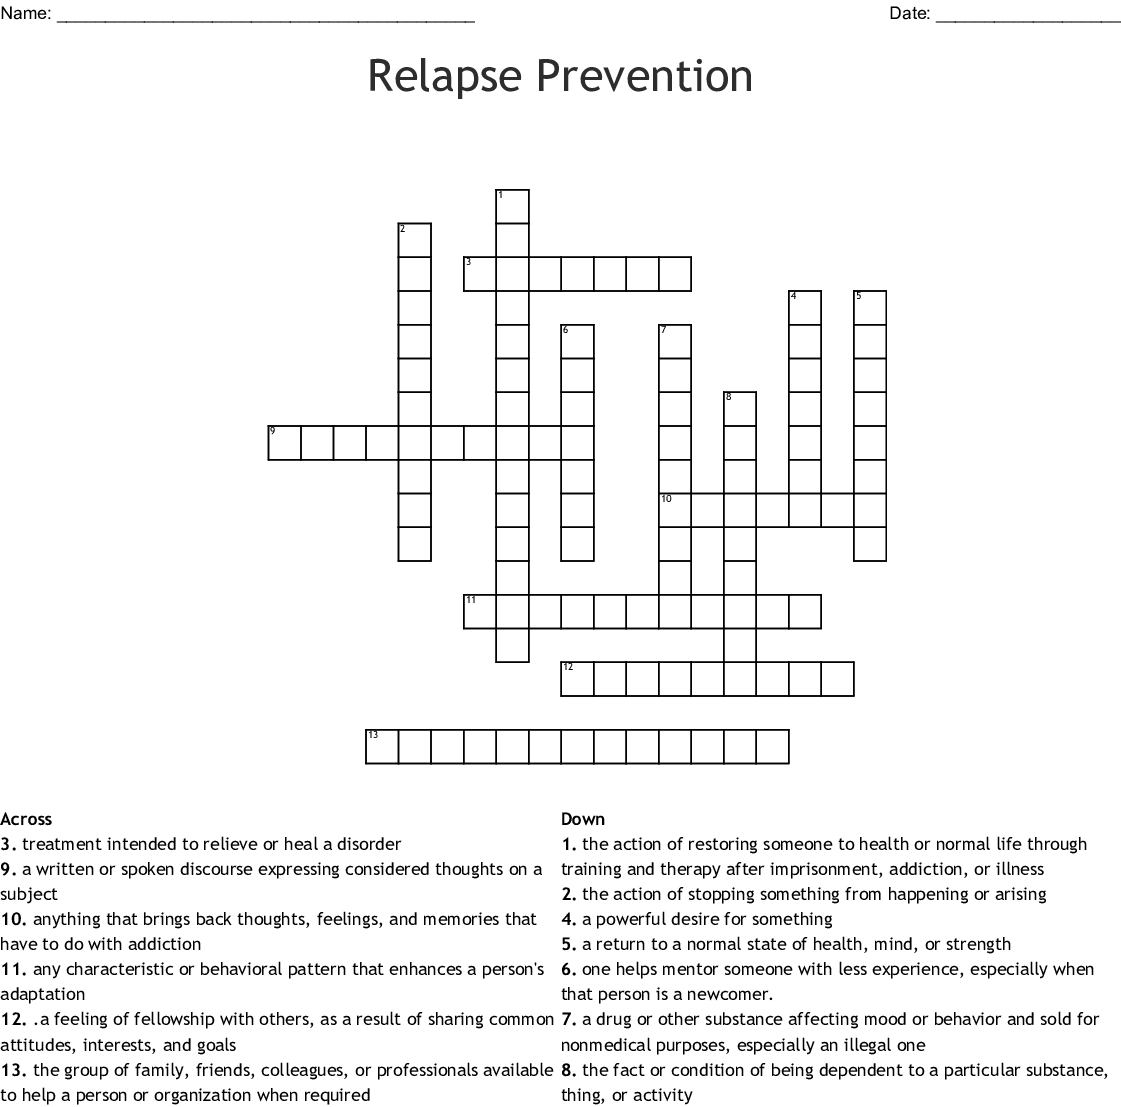 Recovery Crossword Puzzles Printable